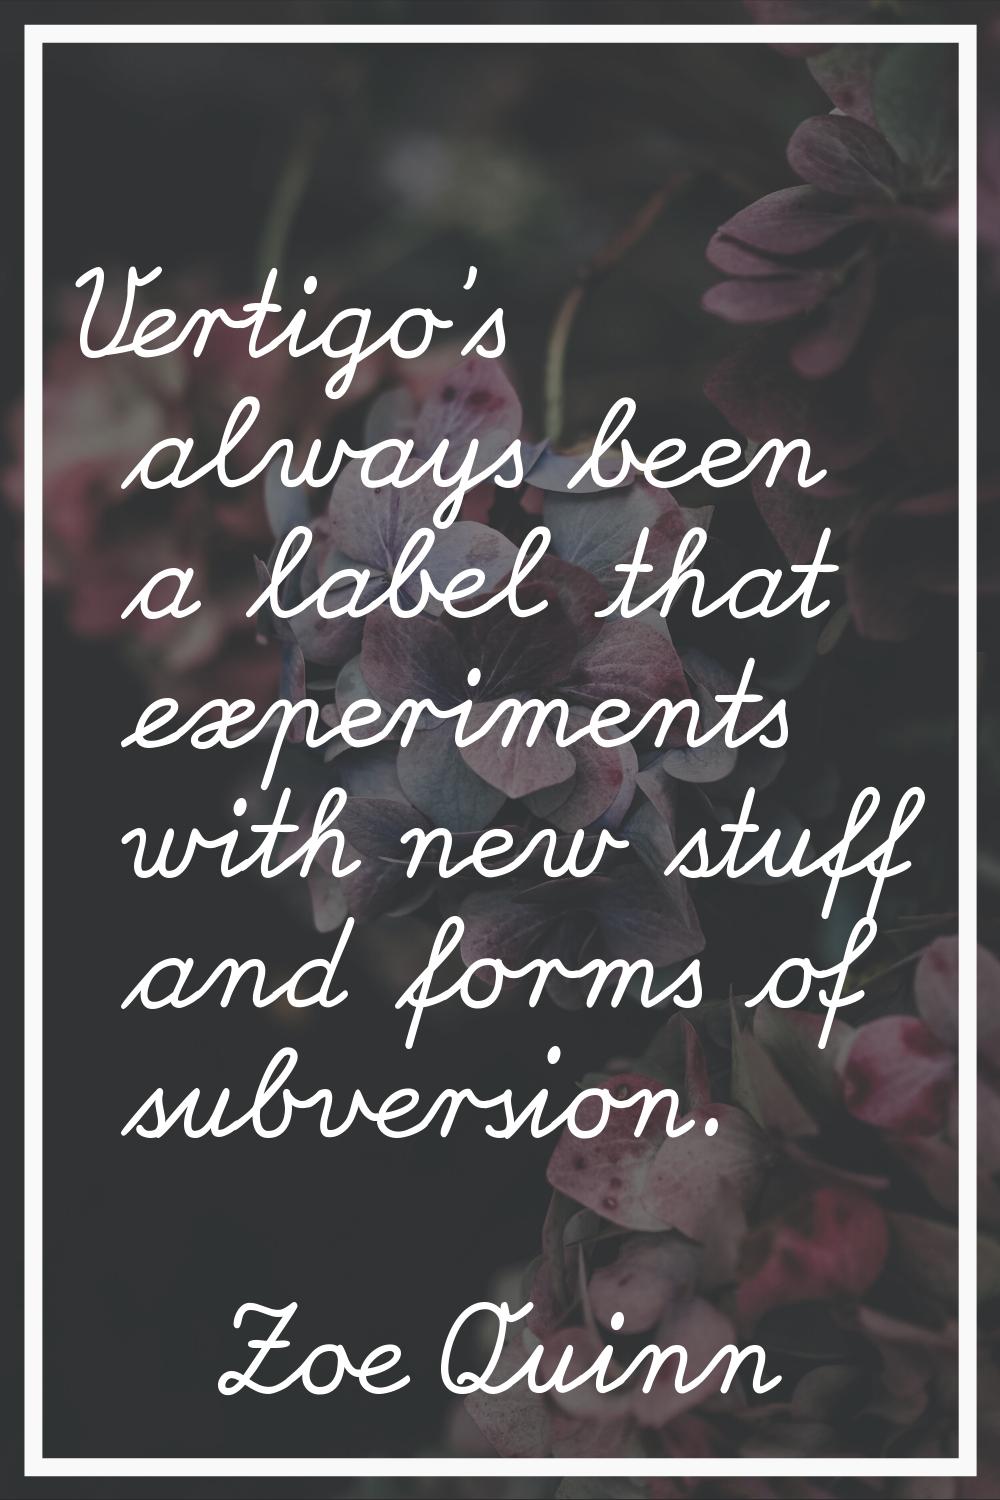 Vertigo's always been a label that experiments with new stuff and forms of subversion.